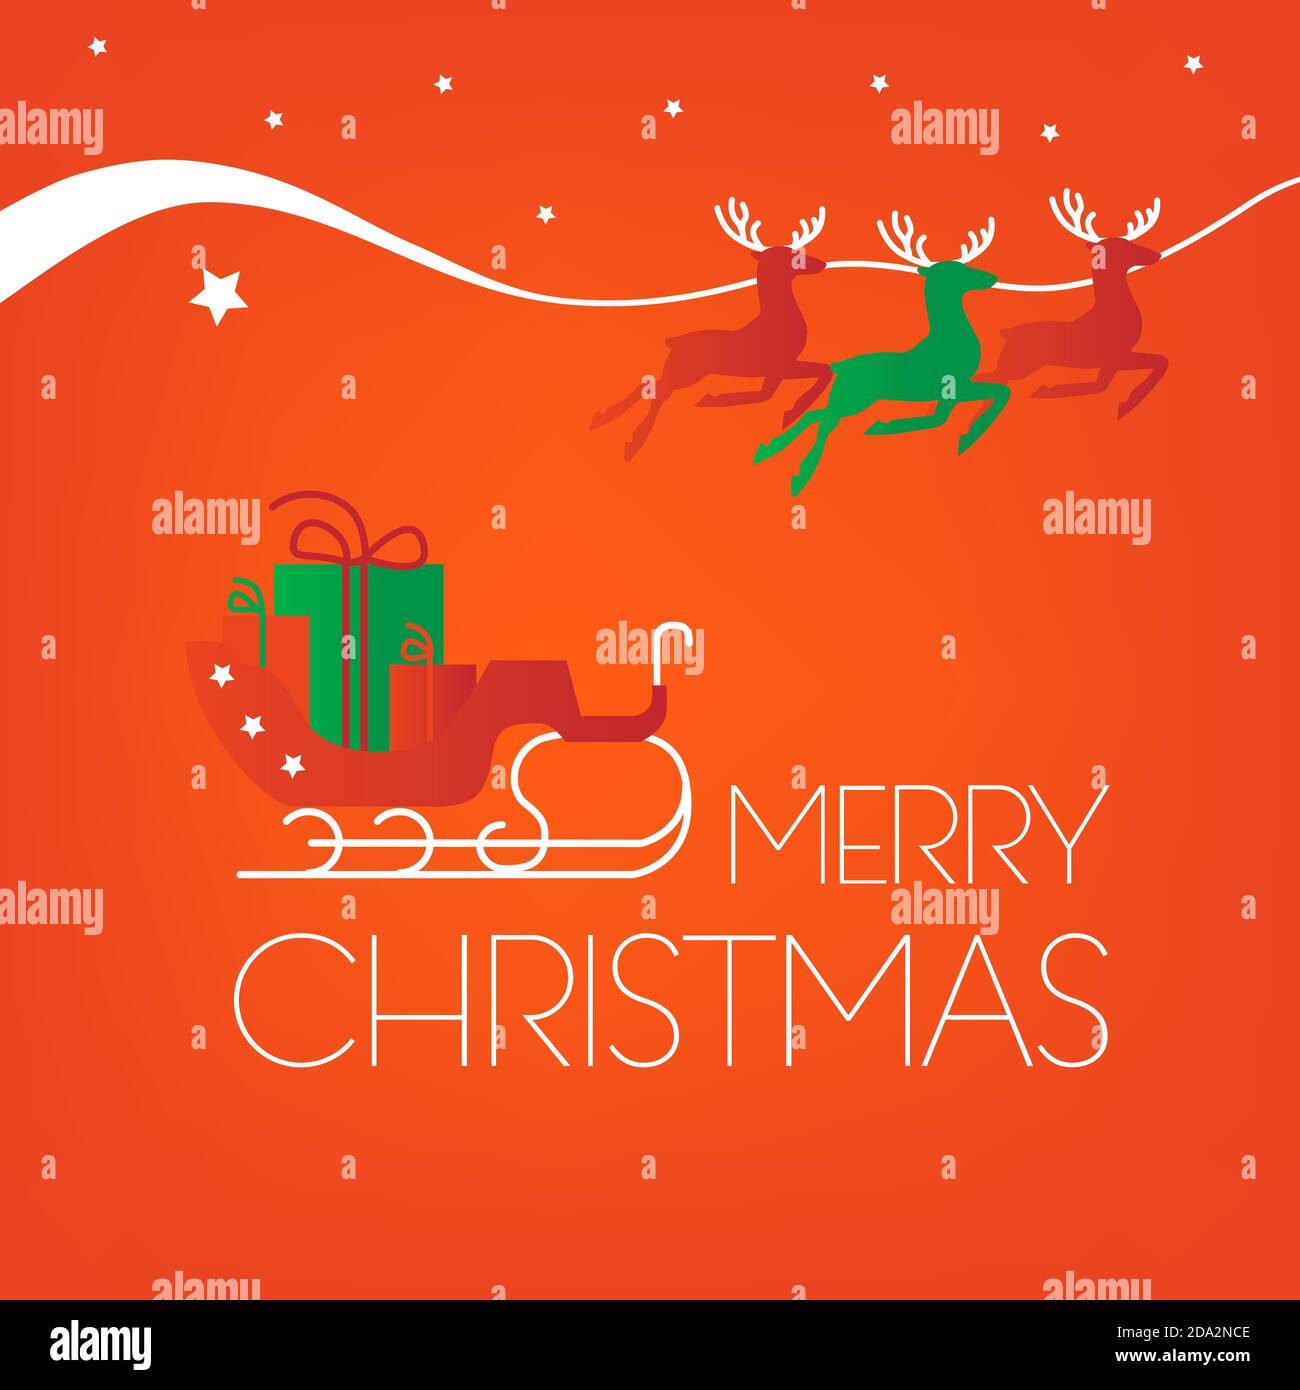 Santa Sleigh and Reindeer, Merry Christmas text on square red background, vector illustration Stock Vector